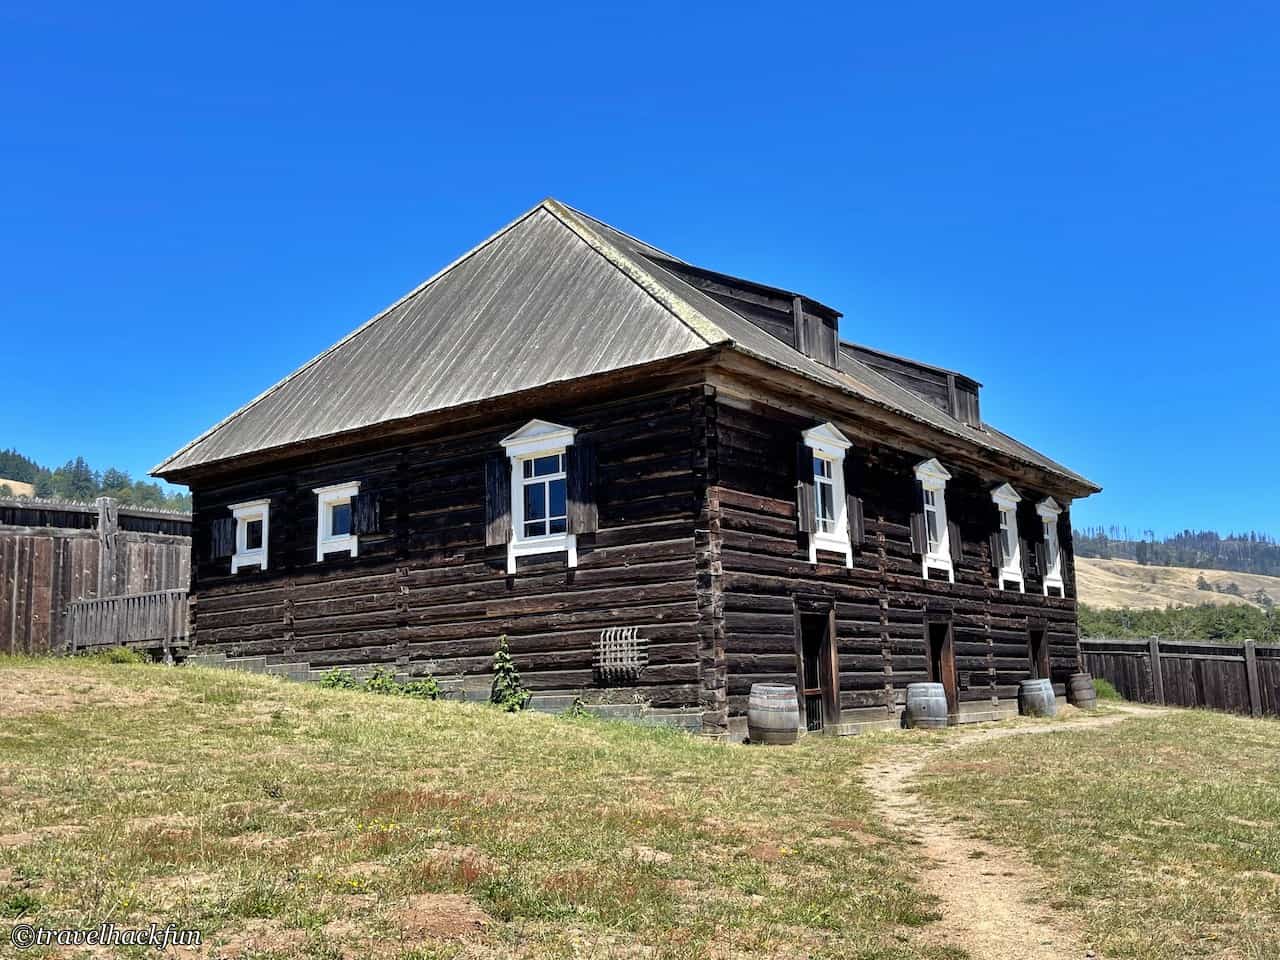 Fort Ross,俄羅斯堡,fort ross state park,fort ross state historic park,fort ross california 36